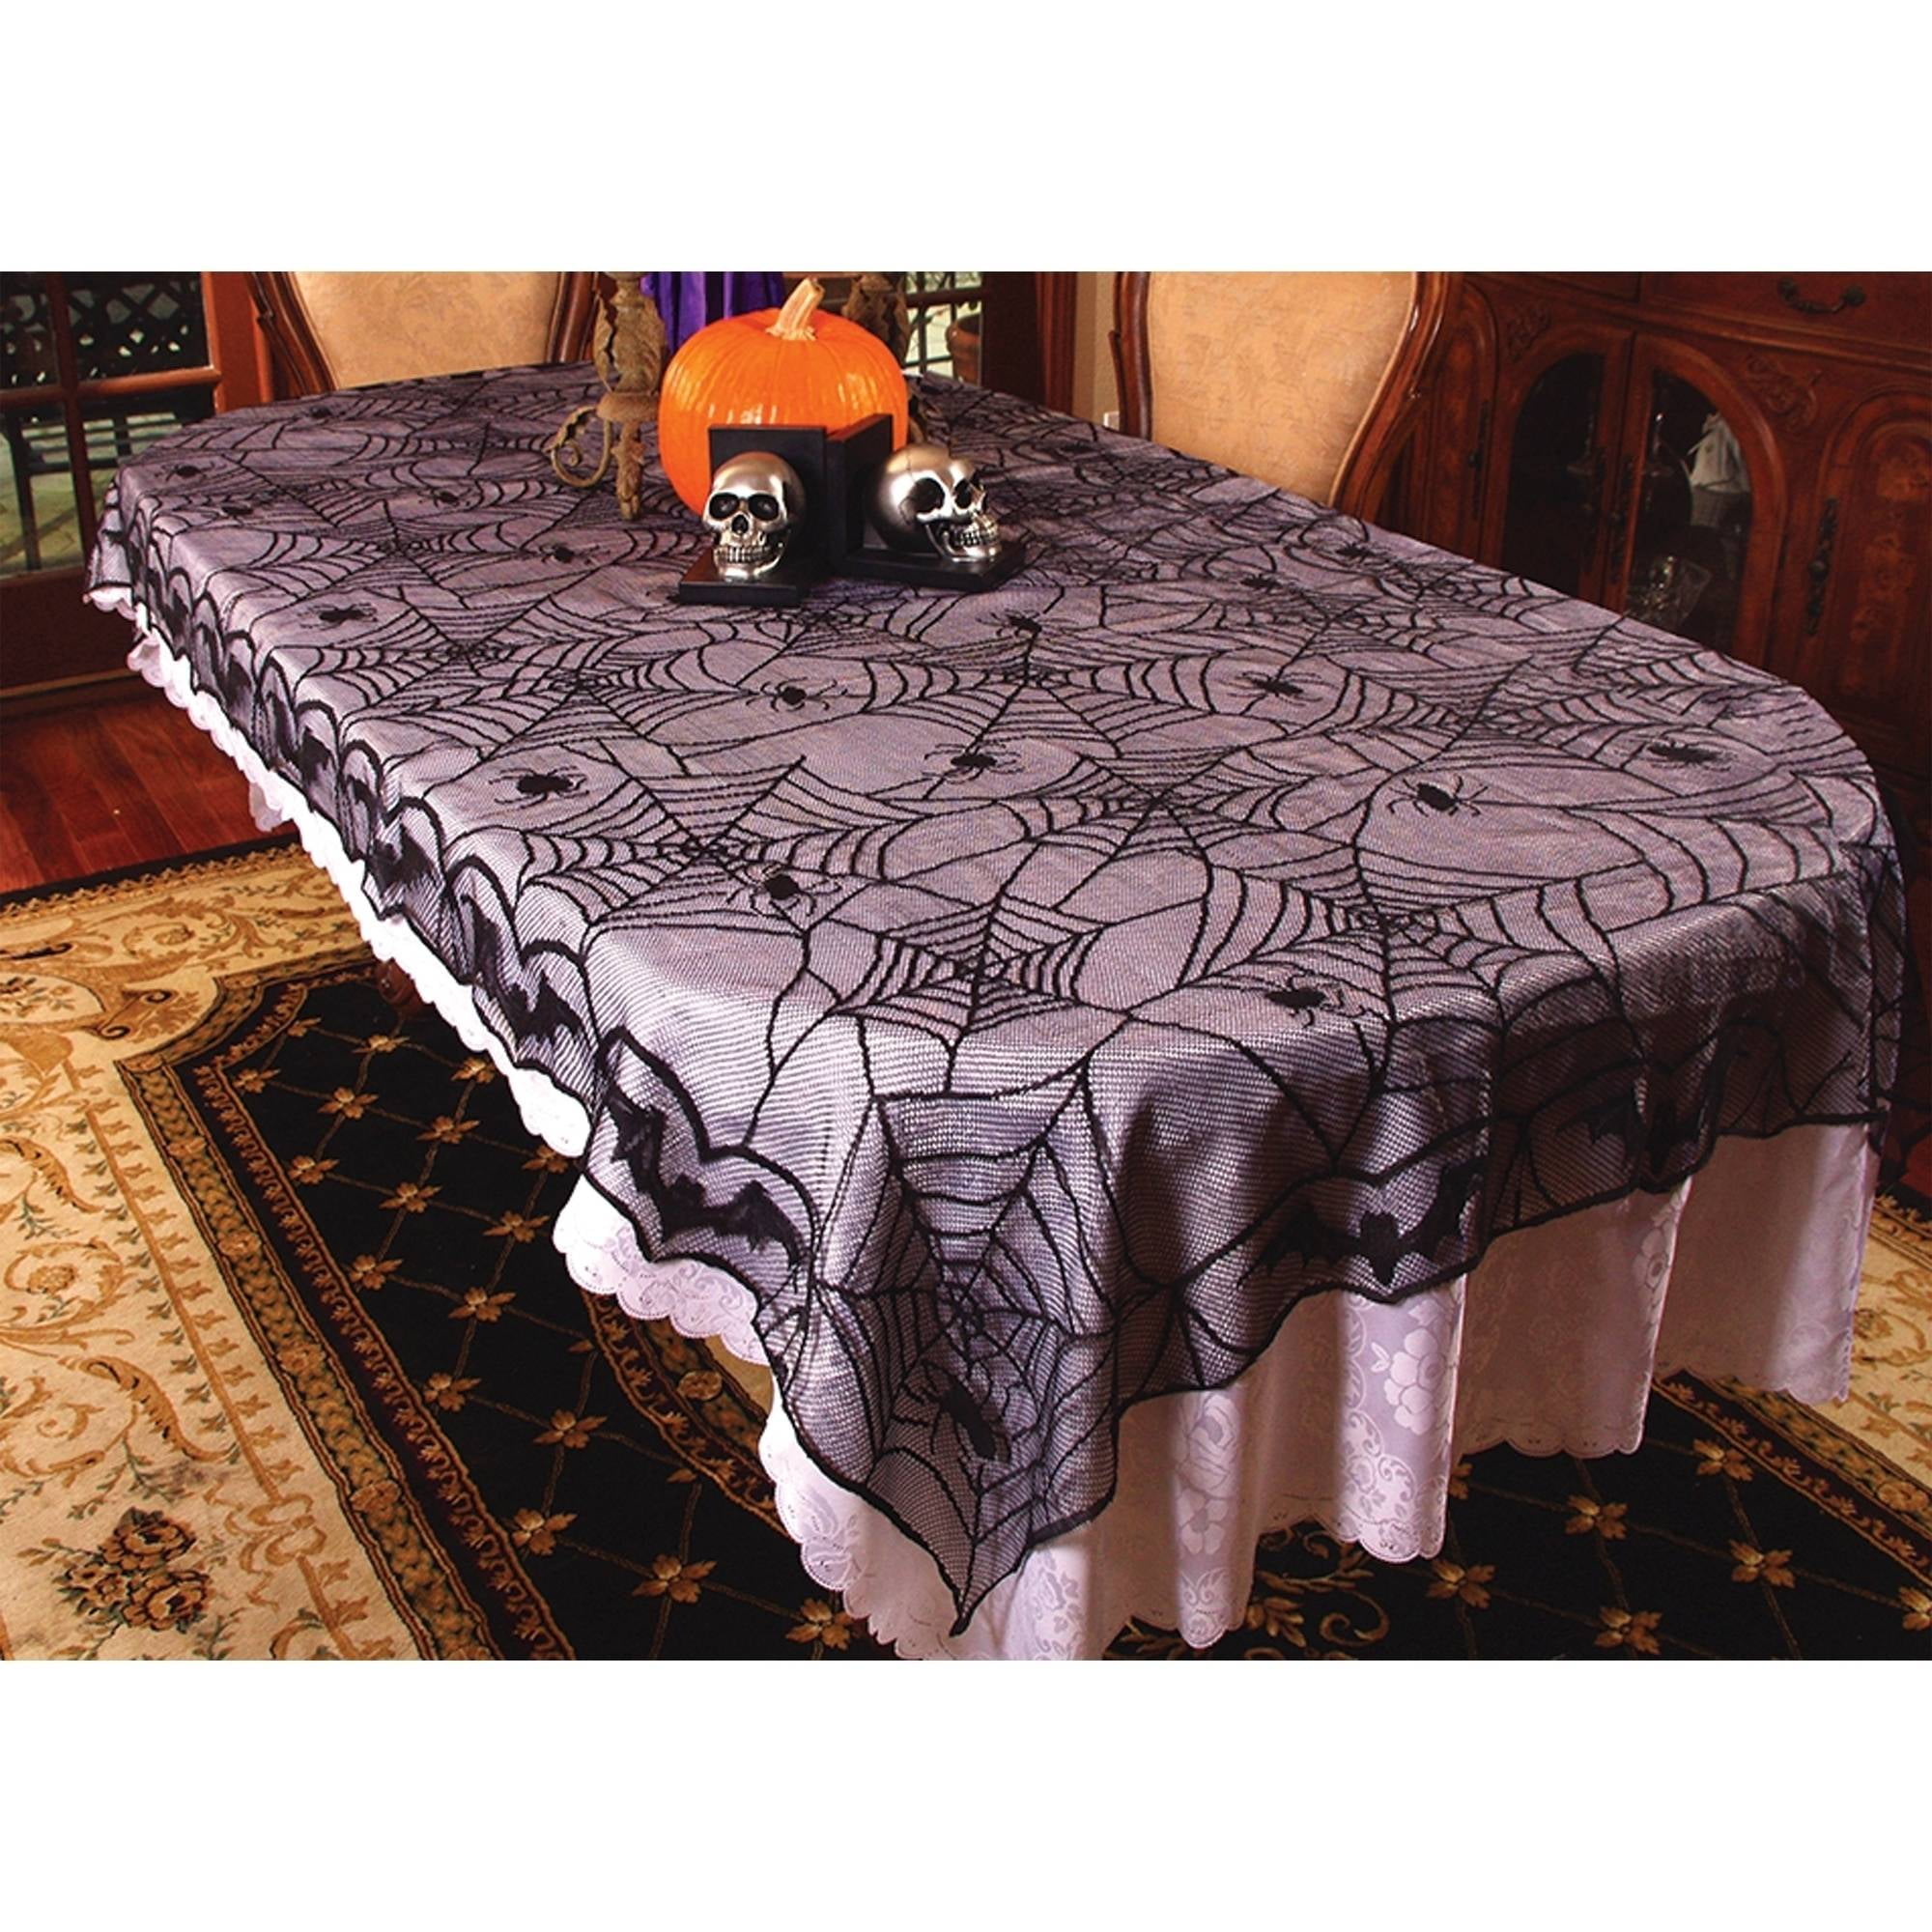 71'' Round Halloween Tablecloth Horror Spider Black Lace Table Cloth Decoration